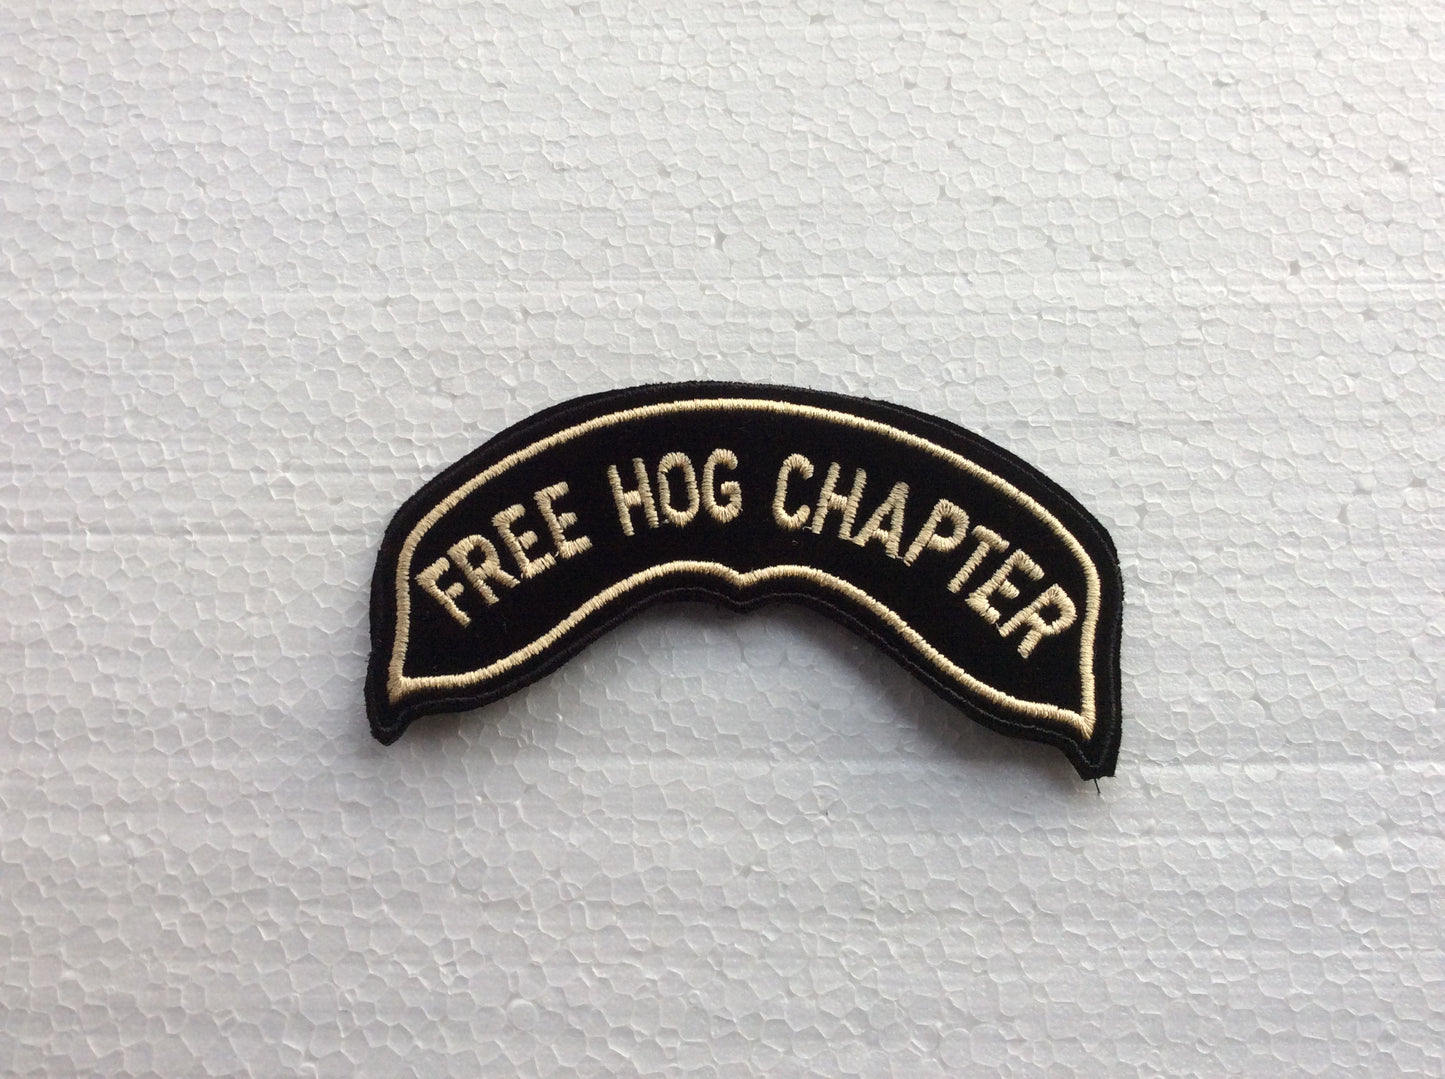 Parche patch gran roker – FREE HOG CHAPTER –